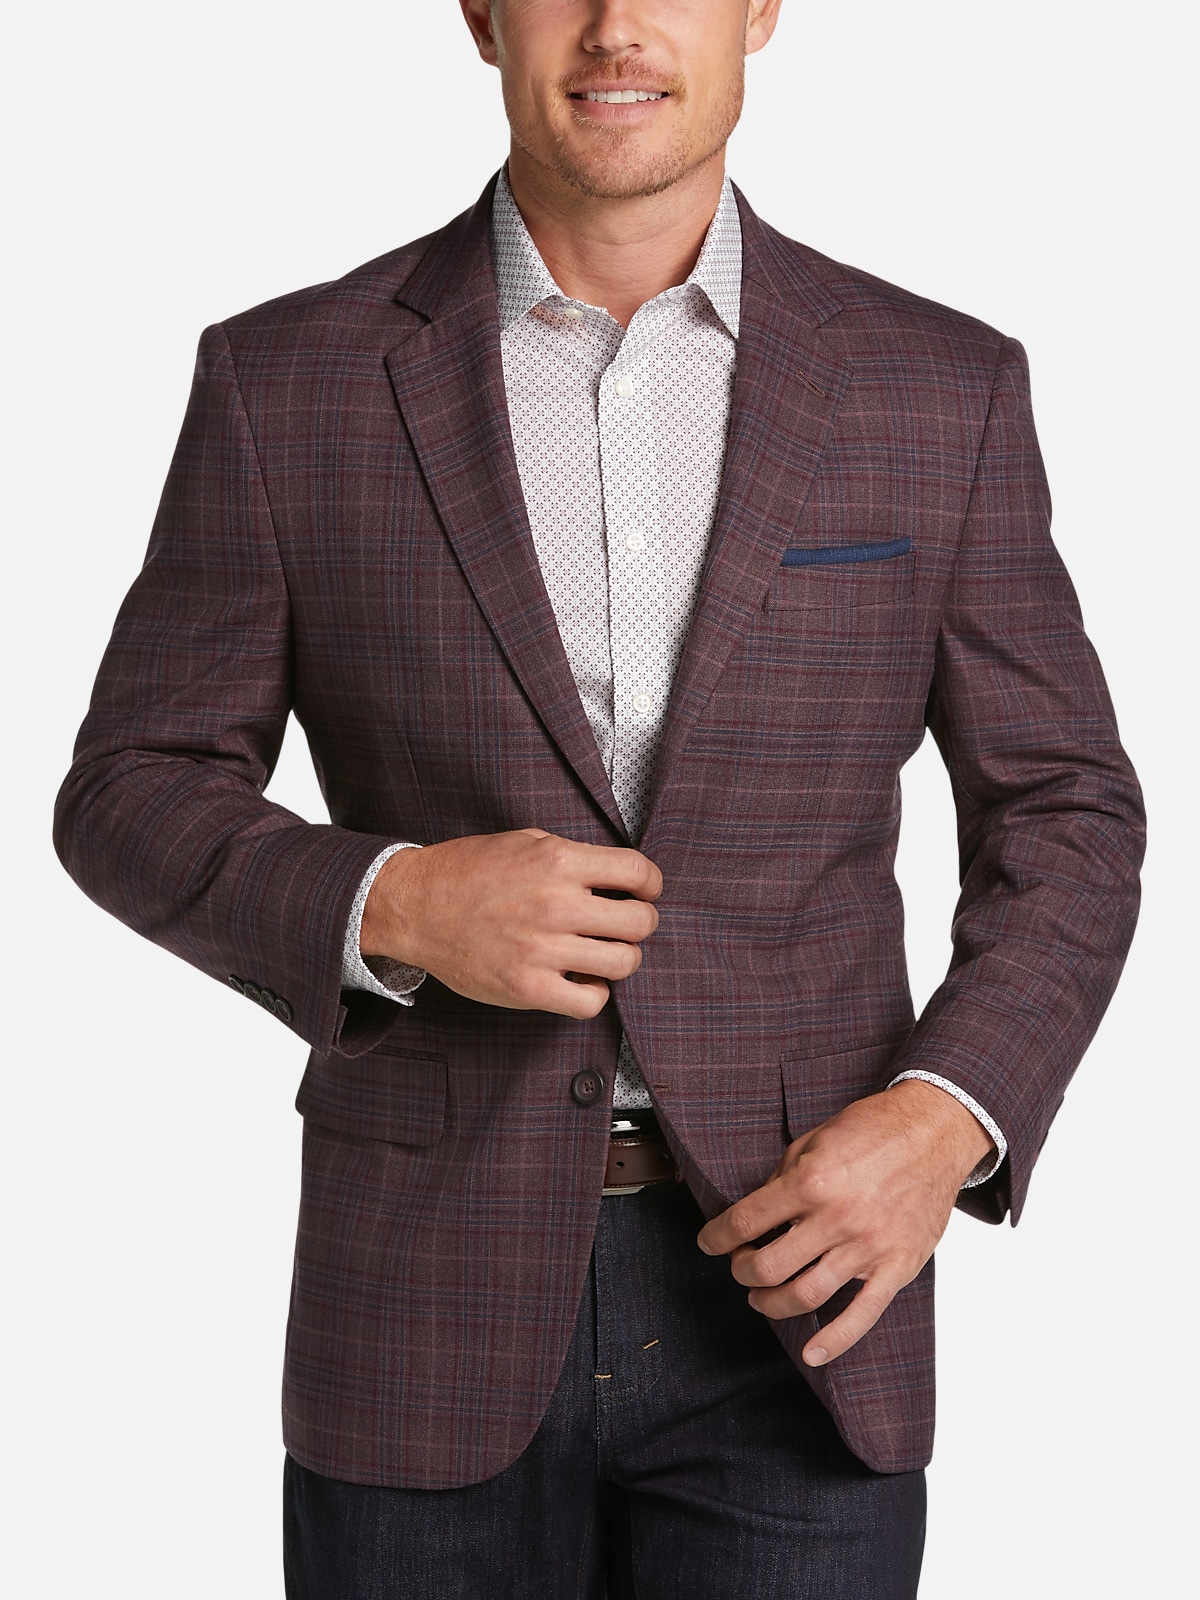 Pronto Uomo Modern Fit Sport Coat | All Clothing| Men's Wearhouse